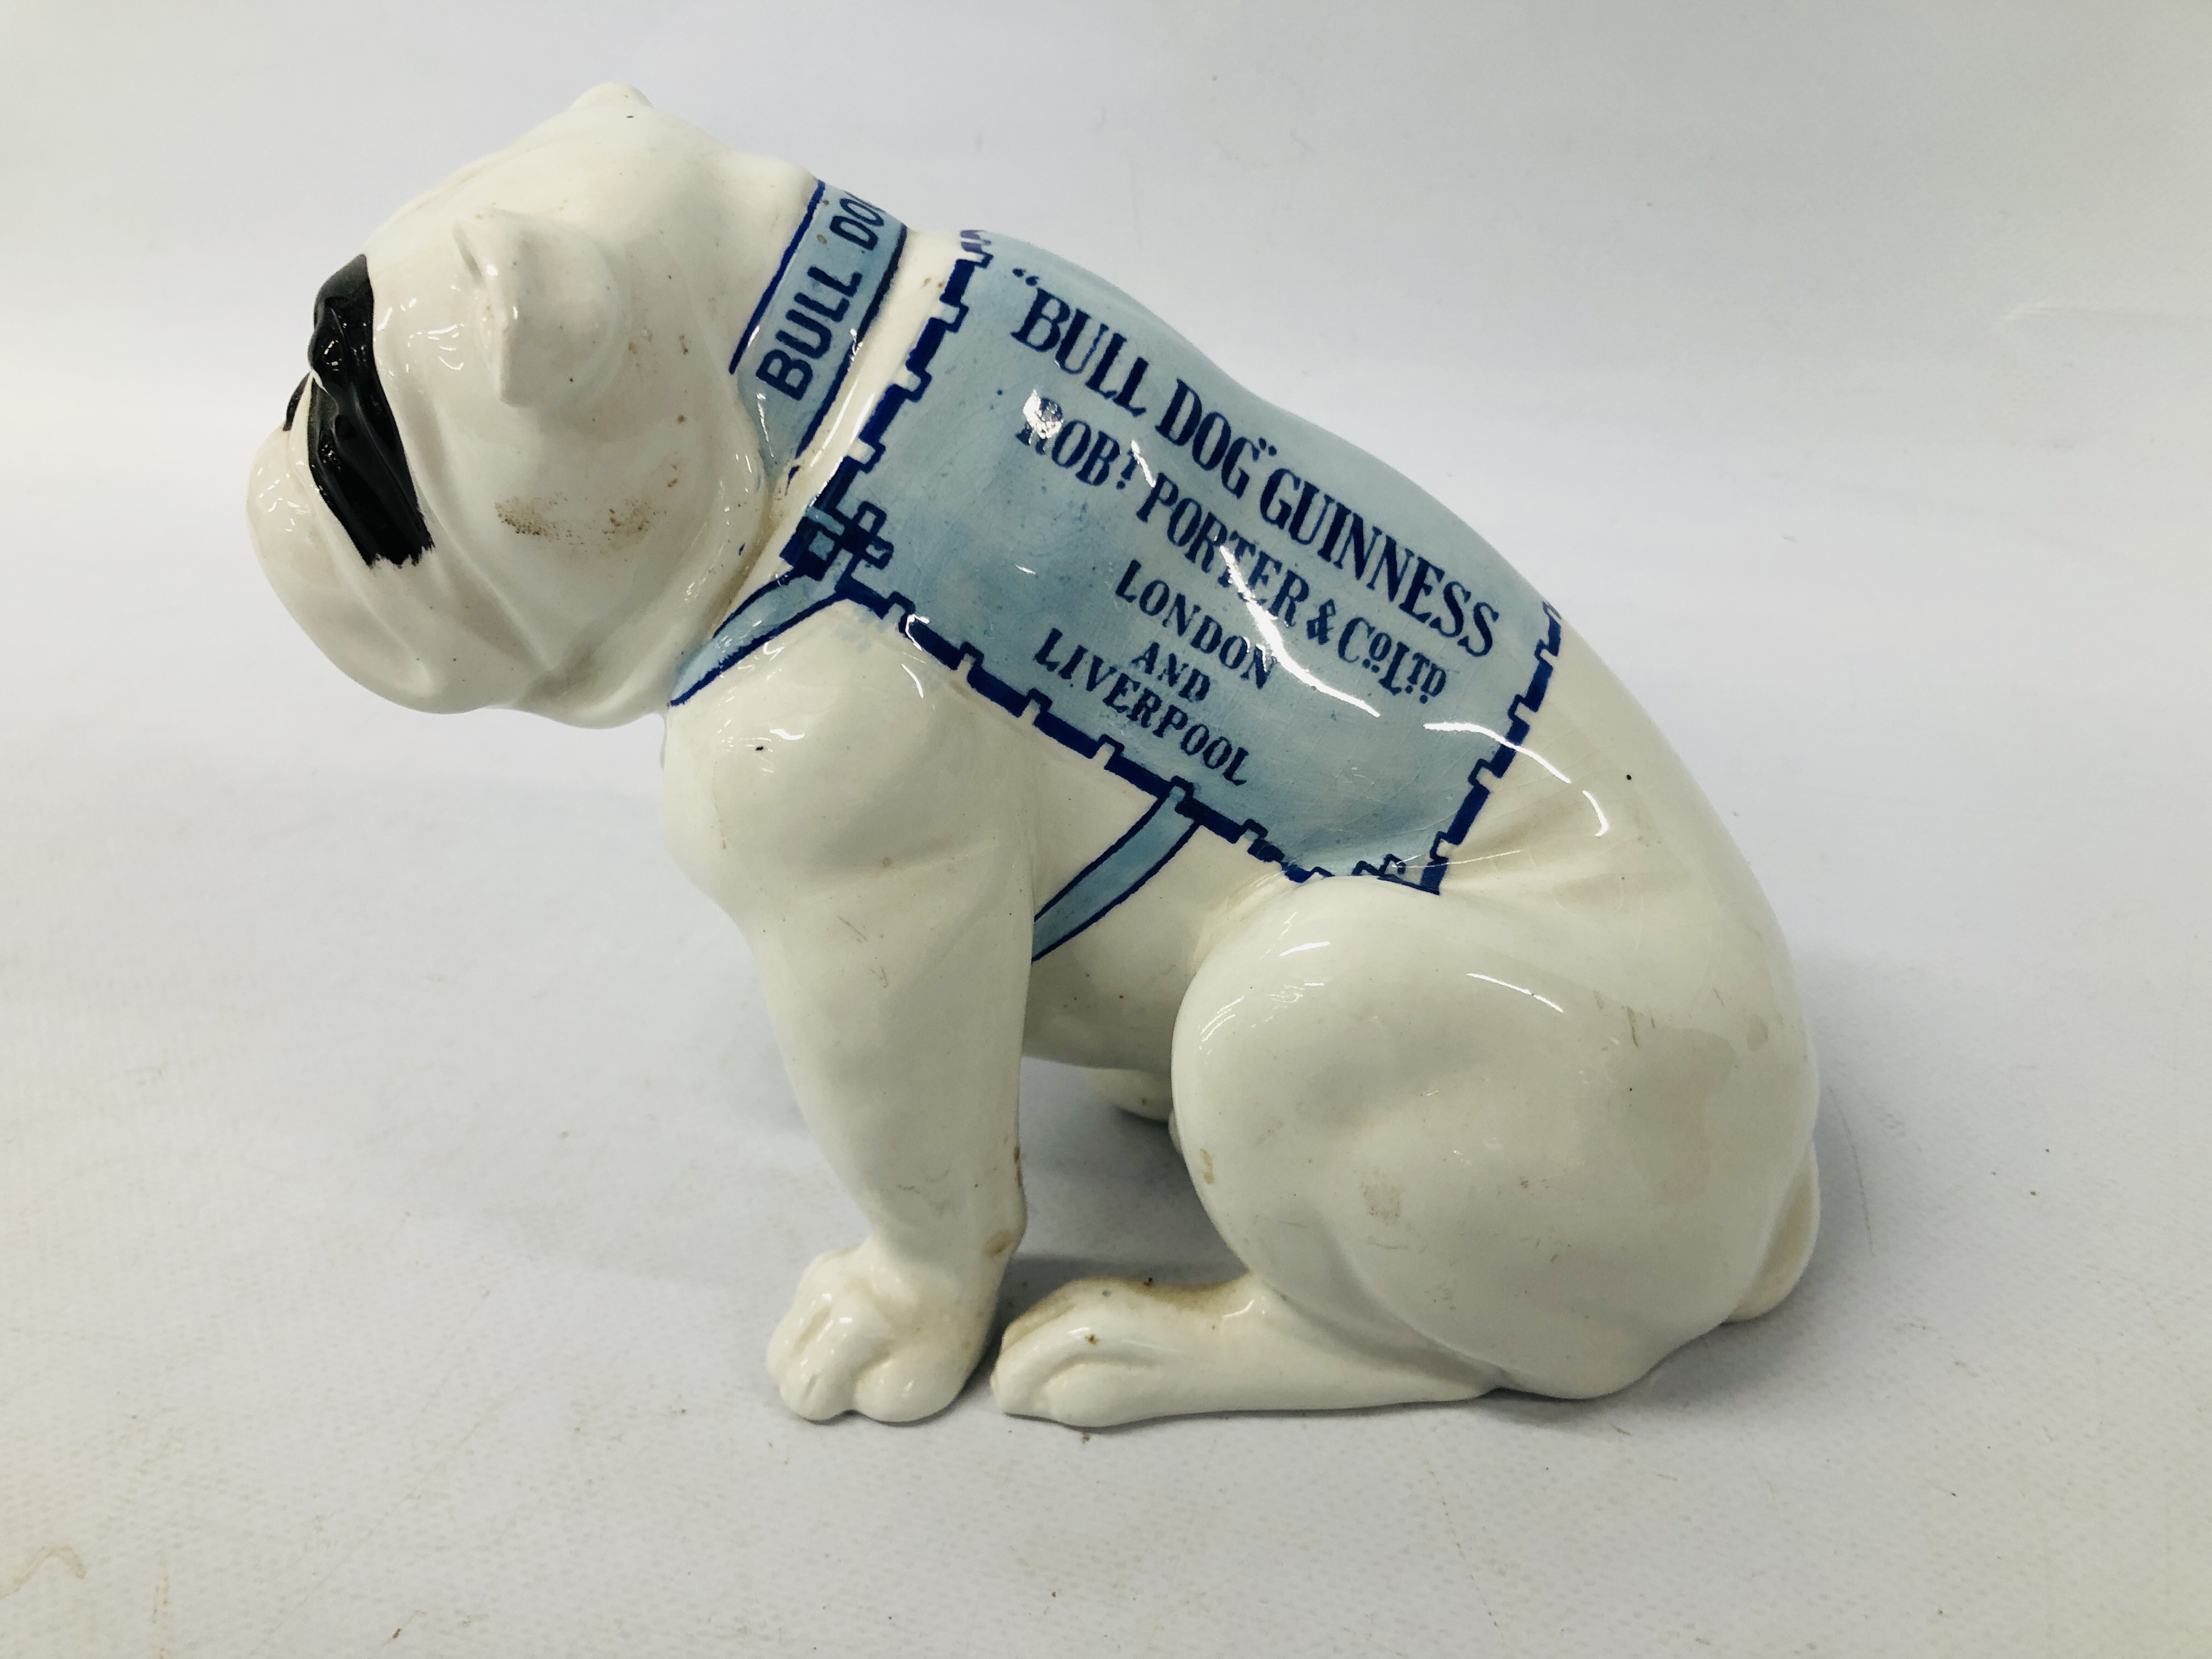 A ROYAL DOULTON ADVERTISING MODEL OF A BULLDOG "PILSENER" AND GUINNESS H 14.5CM. - Image 4 of 9